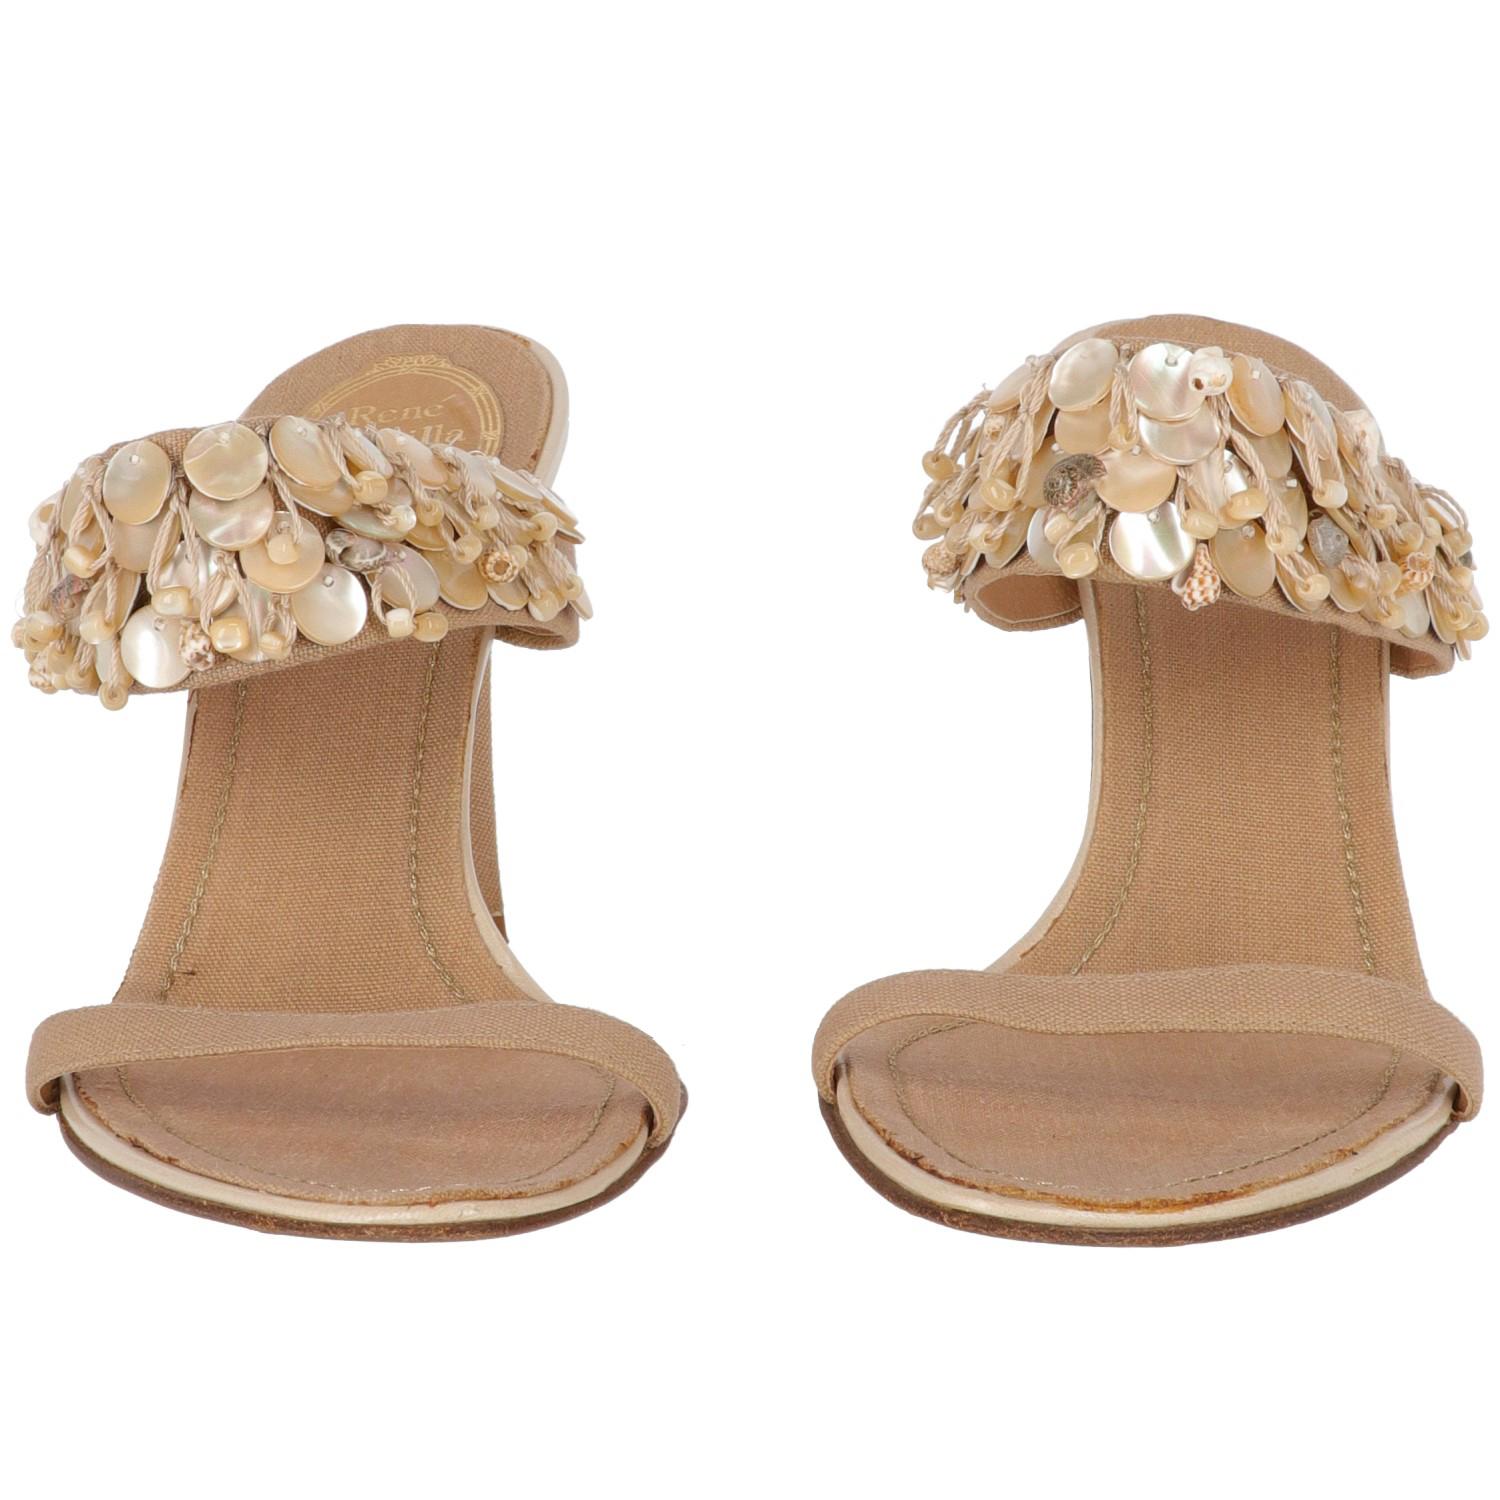 The elegant René Caovilla beige and pearl ivory leather sandals are covered by a soft beige linen. It features a 9 cm spike heels and mother of pearl details and decorative shells. 
The item shows lightly signs of wear and some stains at insole, as